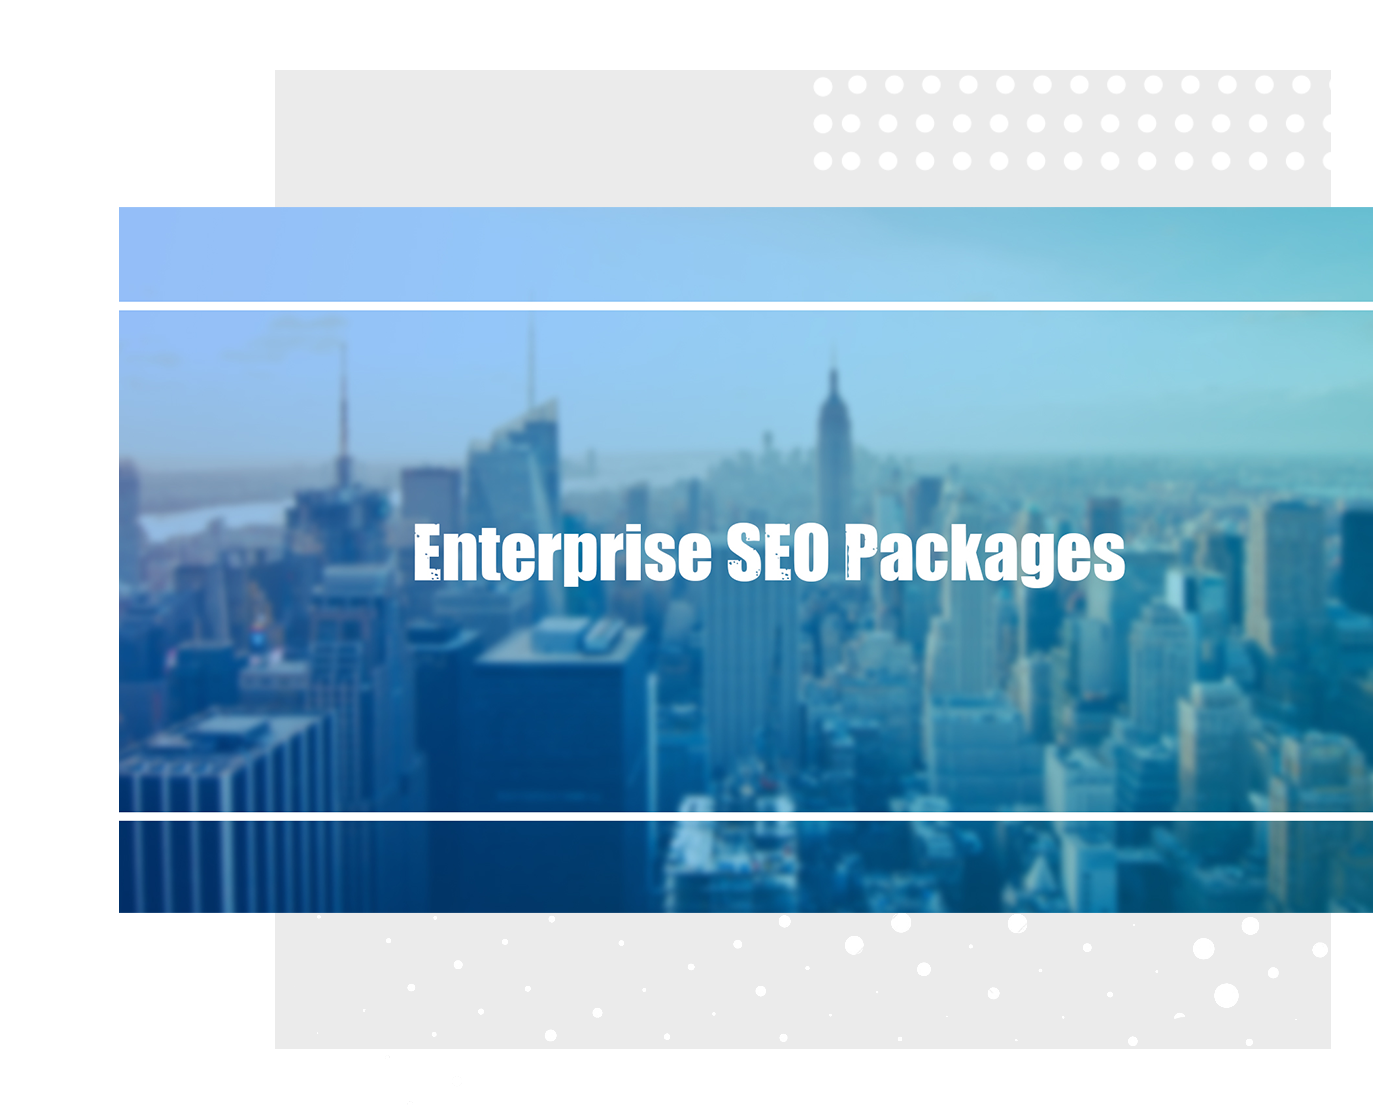 A picture of enterprise SEO packages